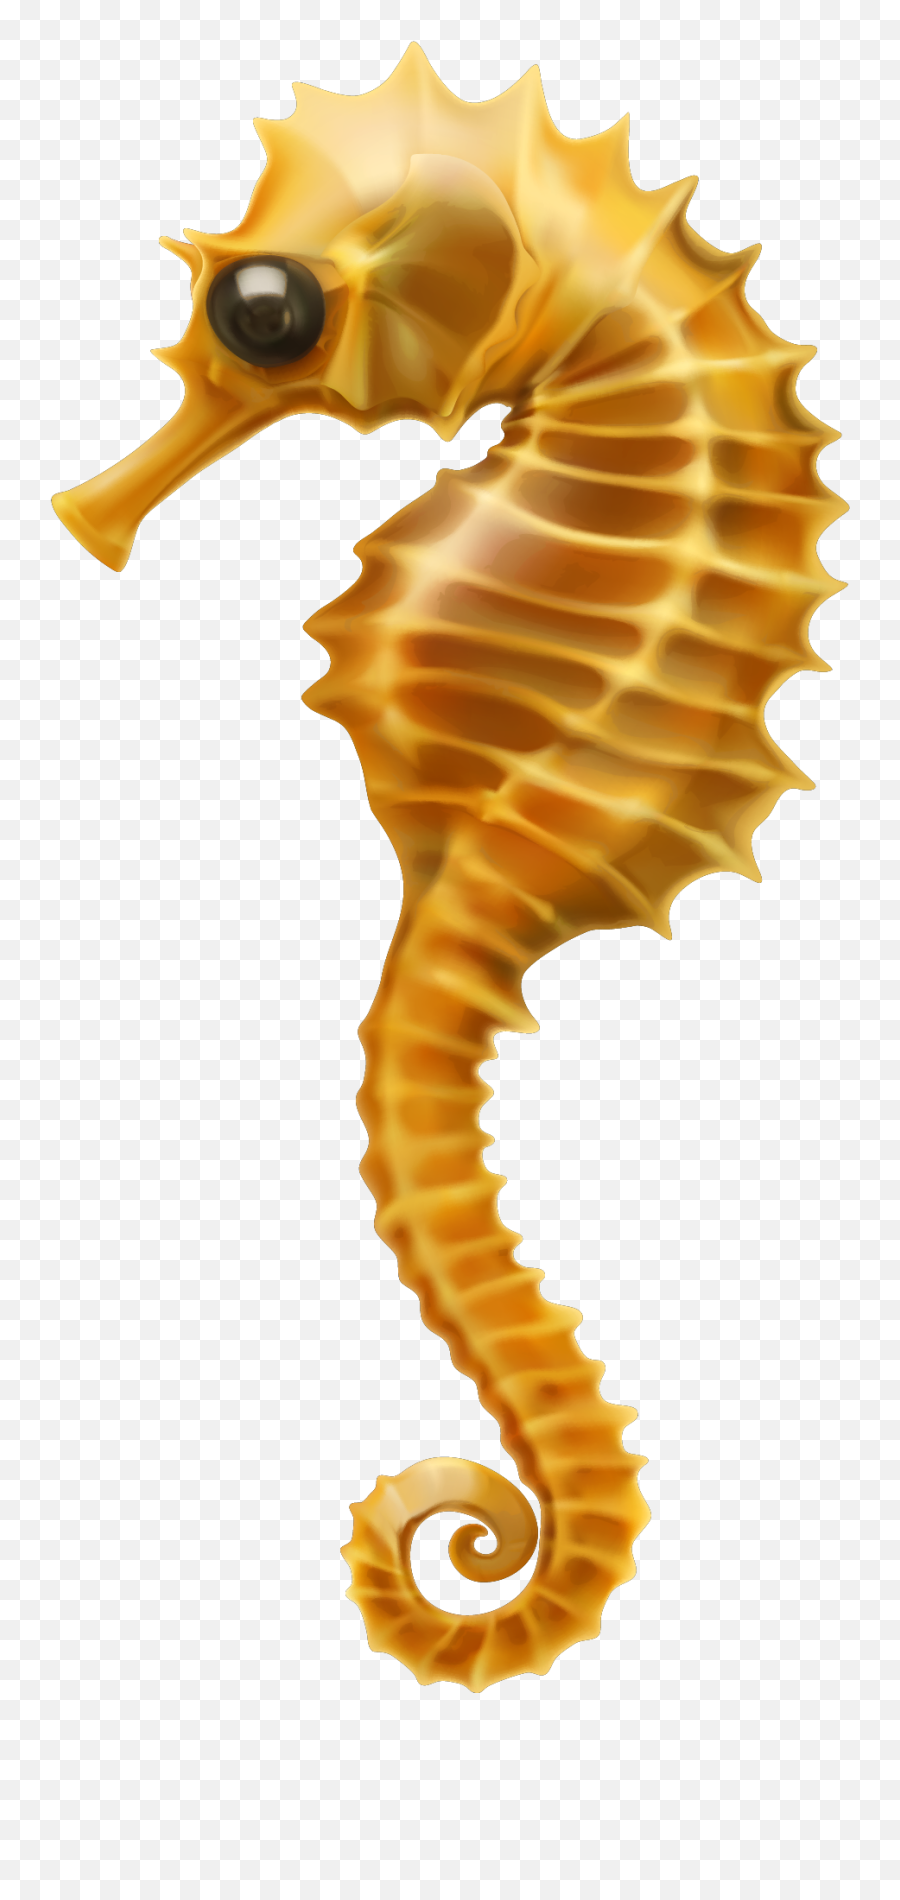 Seahorse Clip Art - Sea Horse Images Hd With White Background Png,Seahorse Png